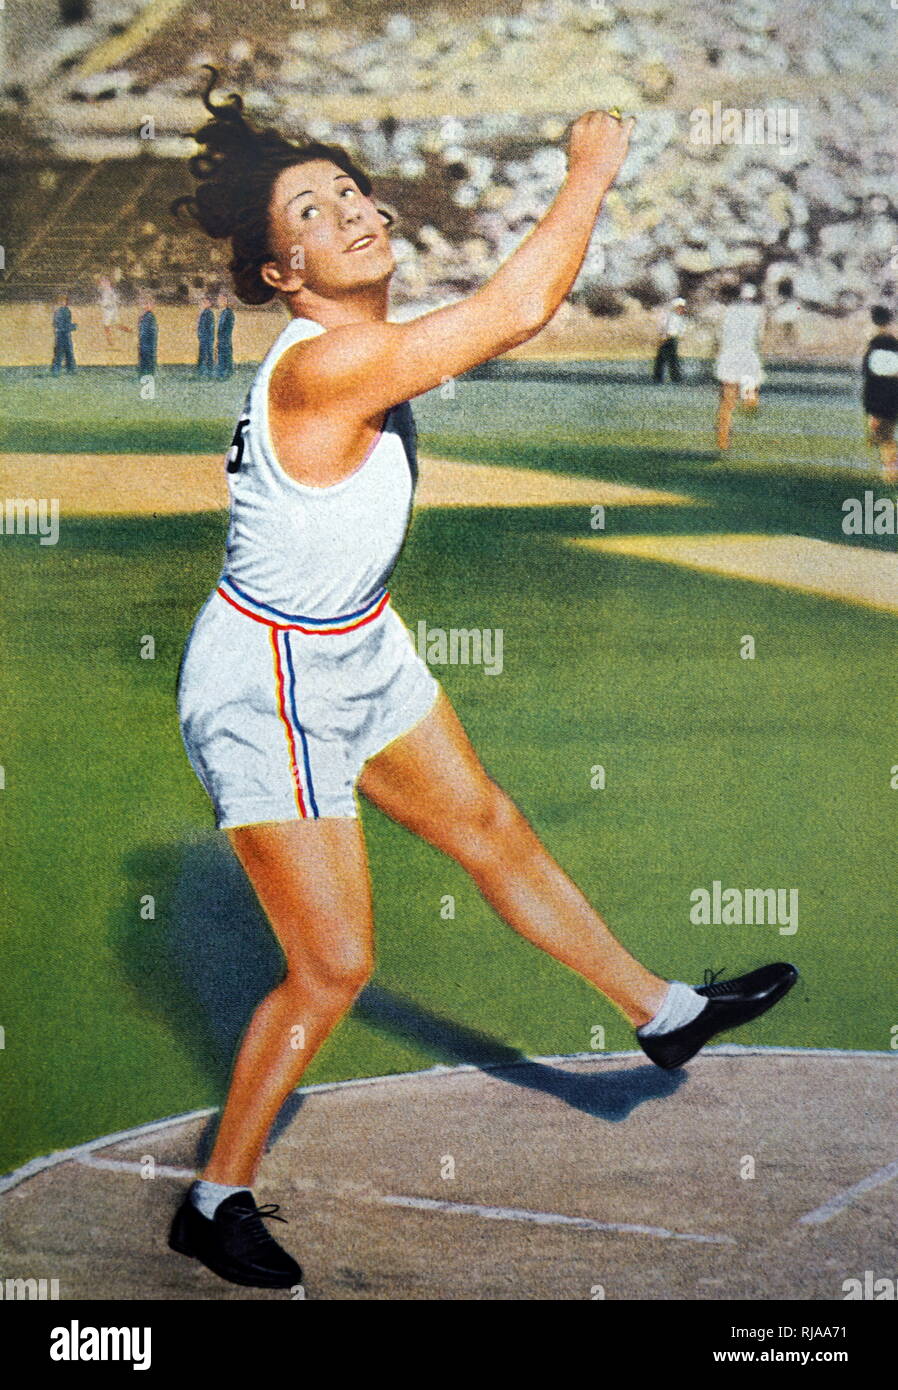 Photograph of Lillian Copeland (1904 - 1964) throwing the discus at the 1932 Olympic games. Lillian took gold for the USA and set a new world record at 133.16 feet. Stock Photo